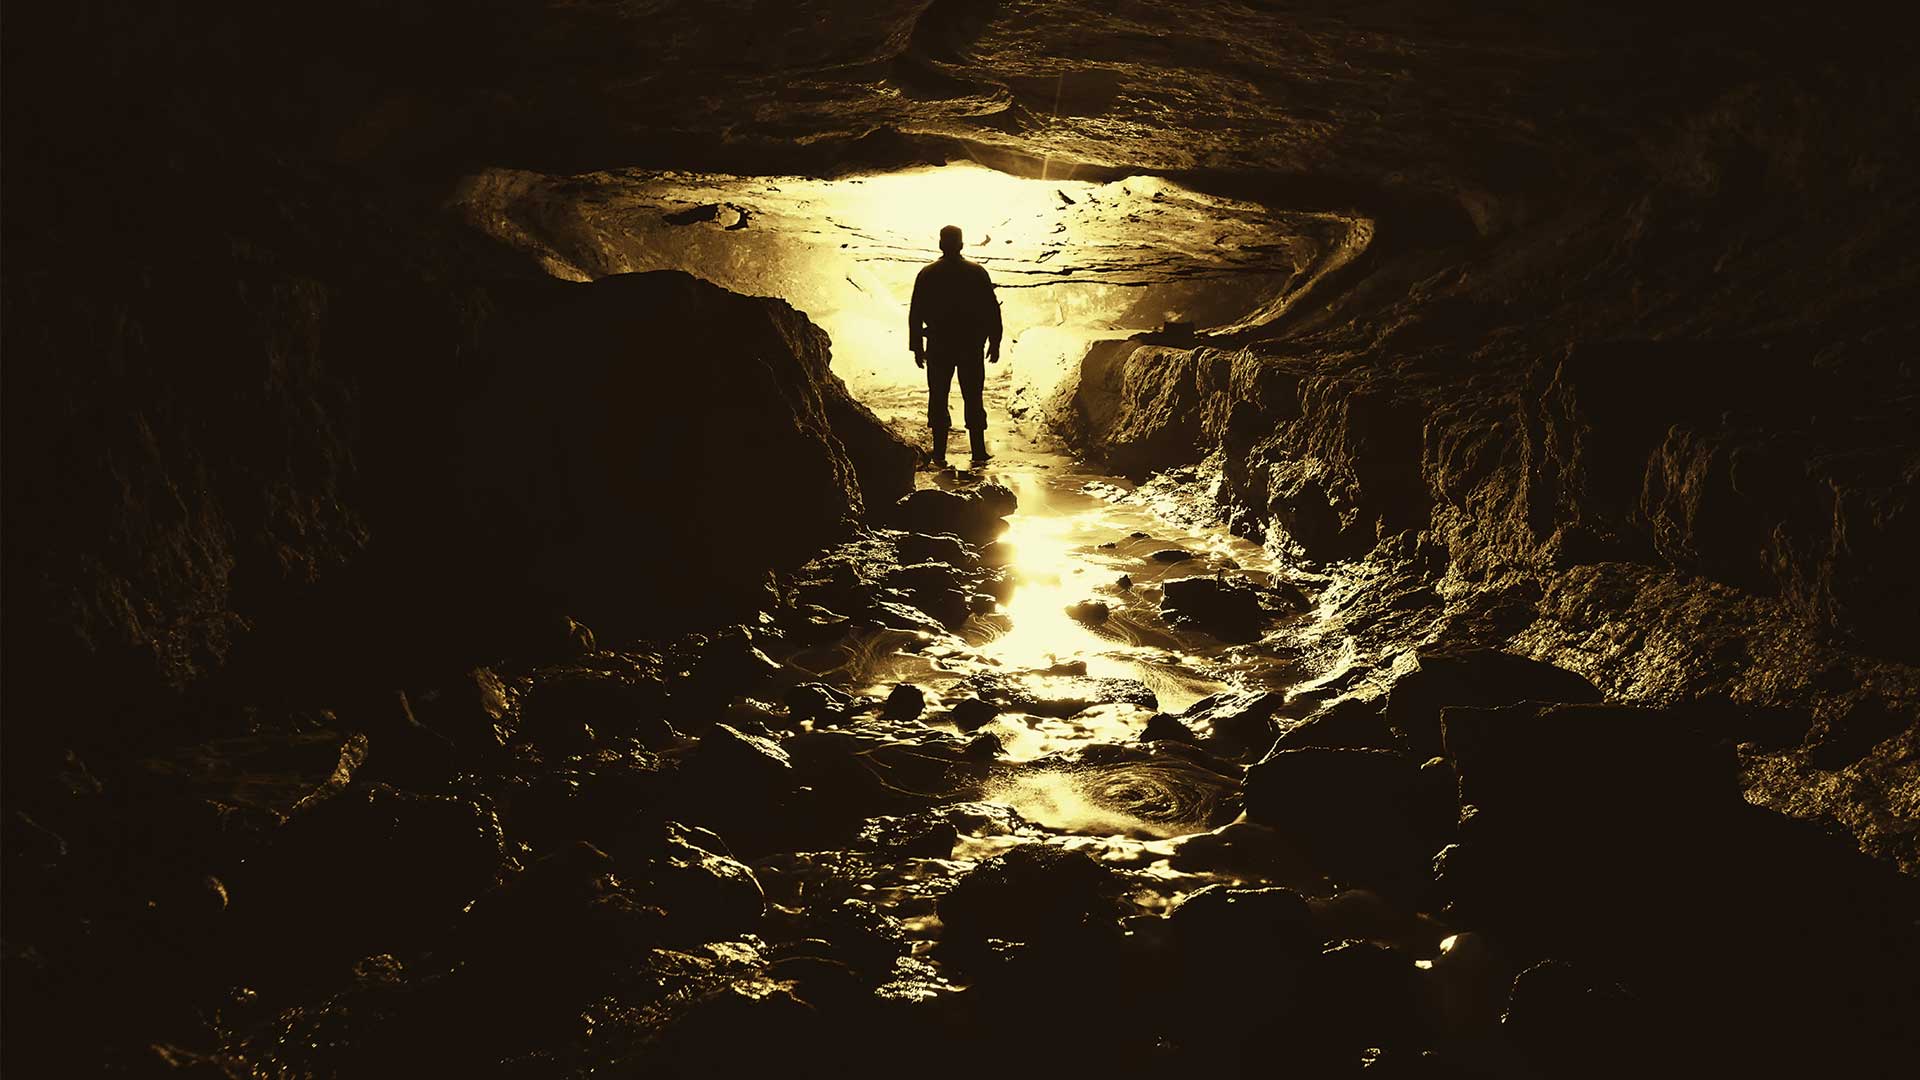 Silhouette of person in a dark cave with only a small bit of light